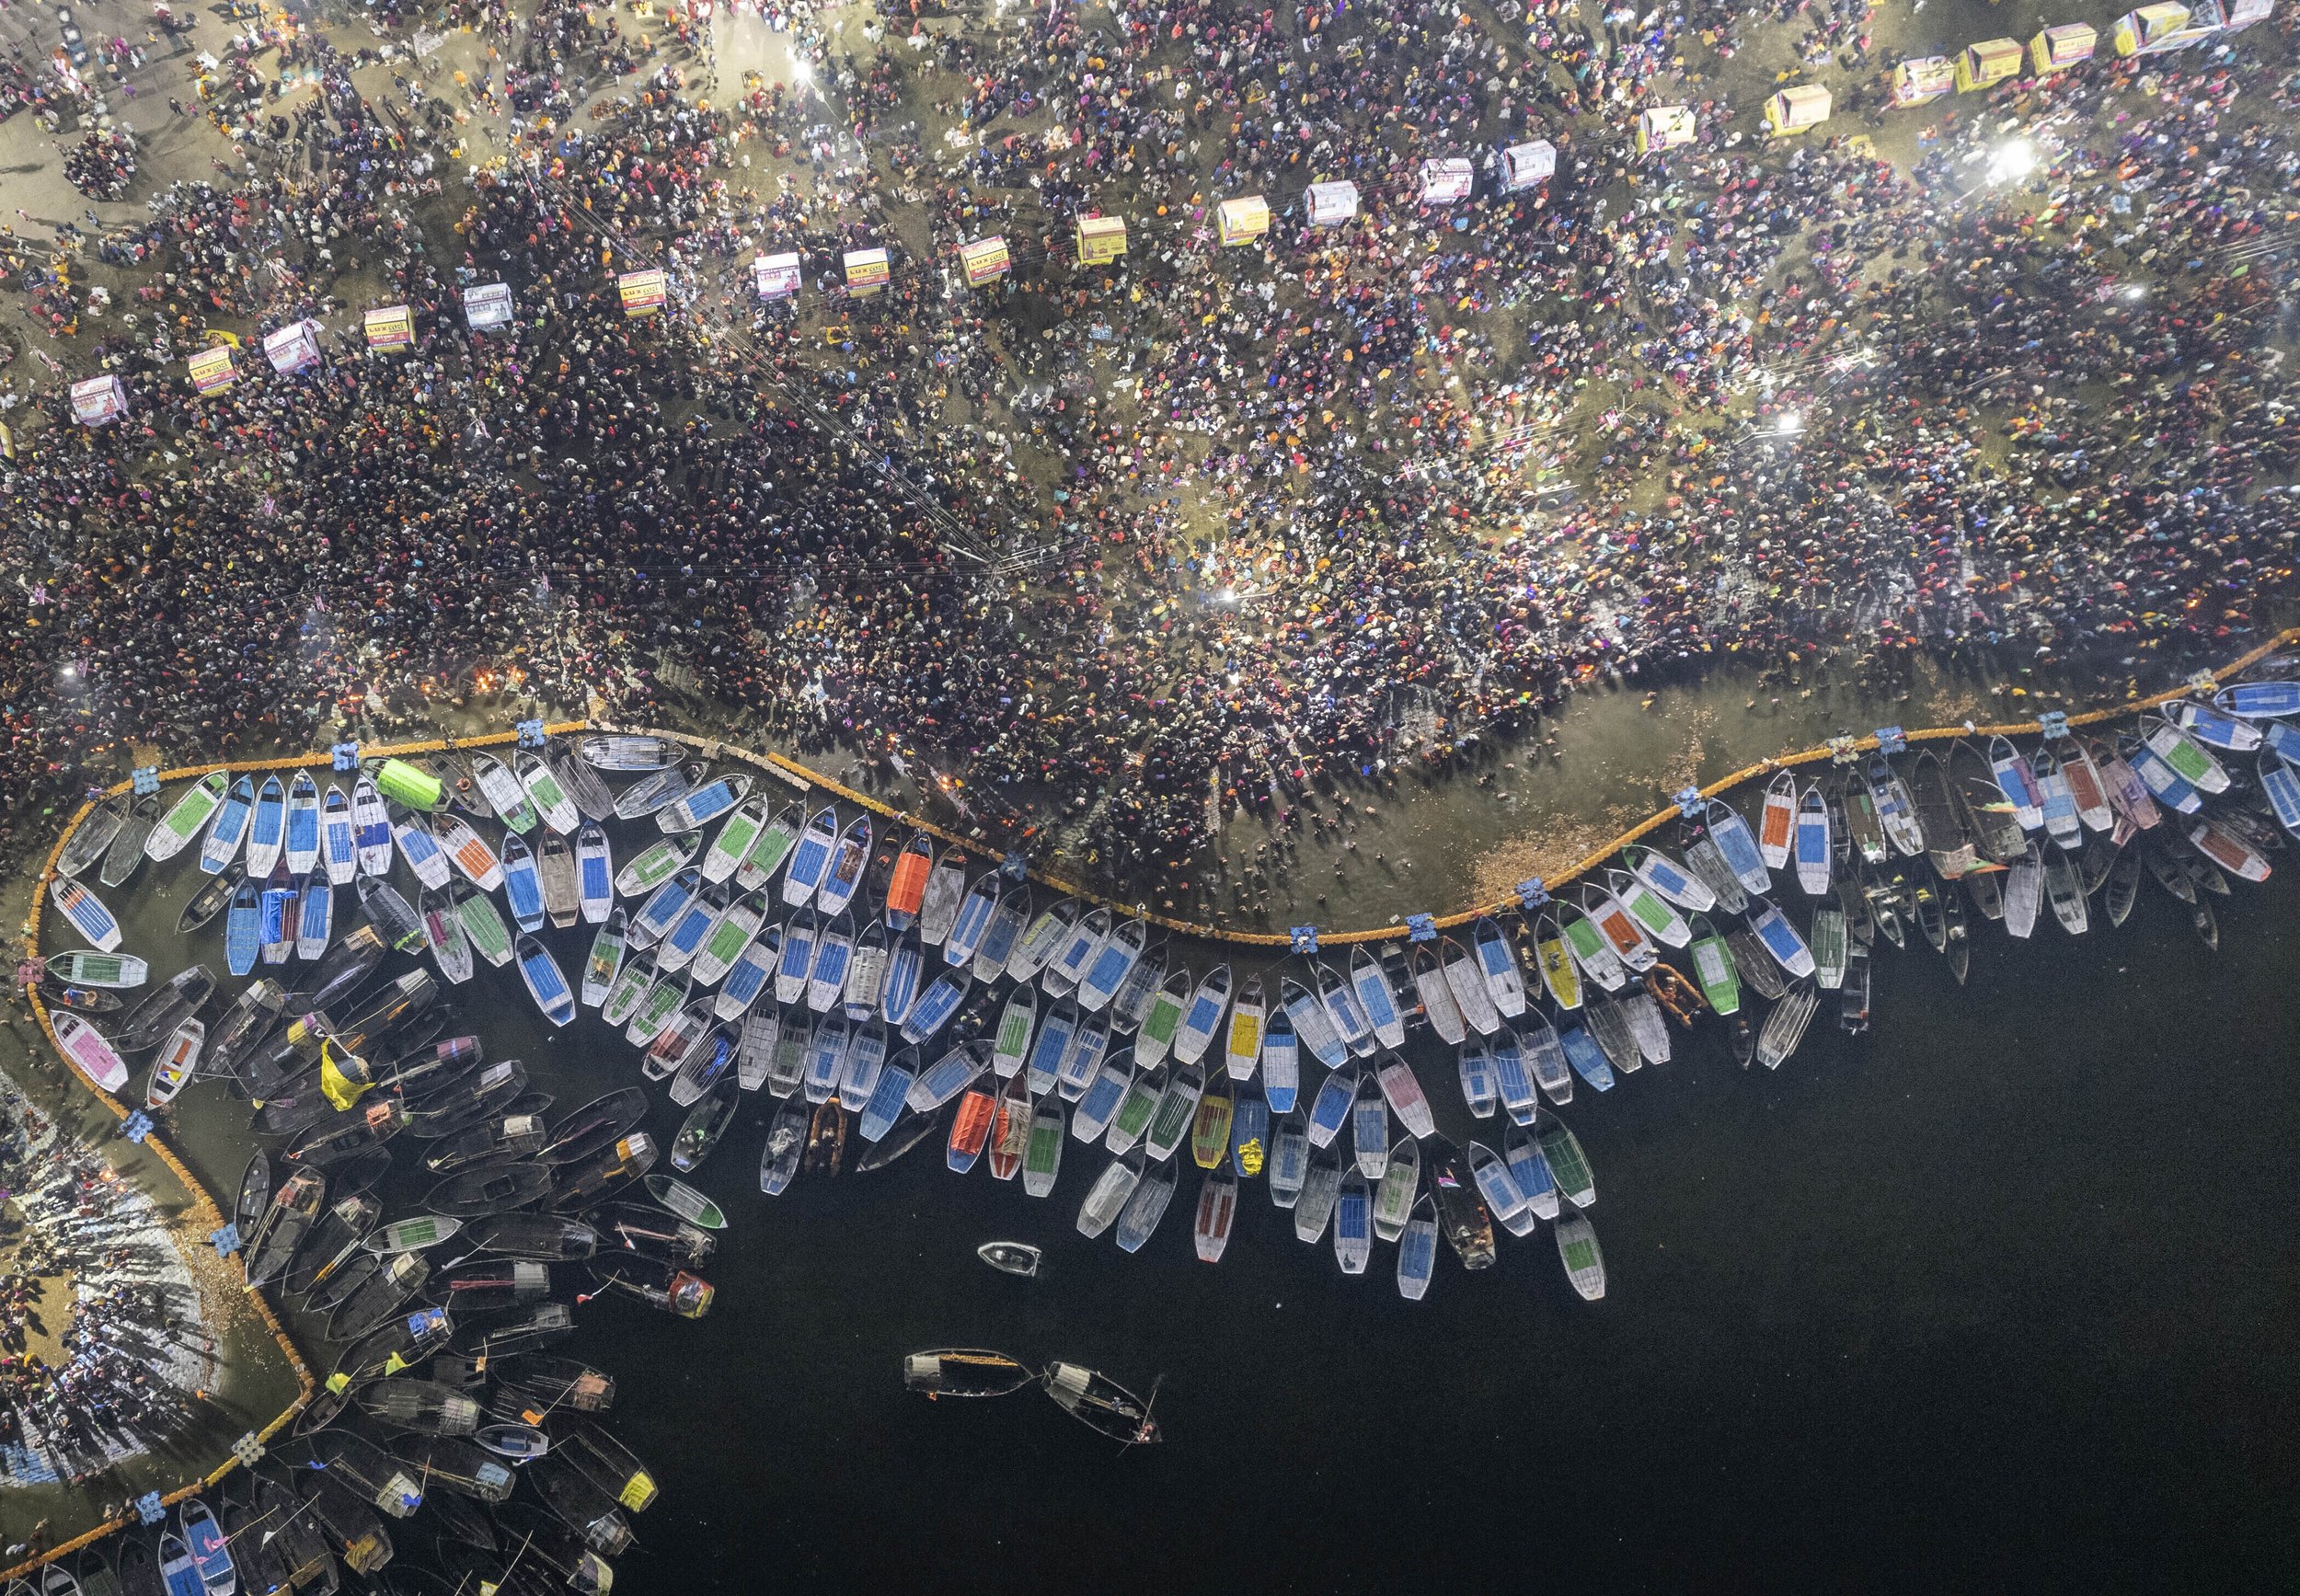  Hindu devotees crowd the Sangam, the confluence of the rivers Ganges, Yamuna and the mythical Saraswati, to take a holy dip on Mauni Amavsya or the new moon day, the most auspicious day during the annual month-long Hindu religious fair "Magh Mela" i